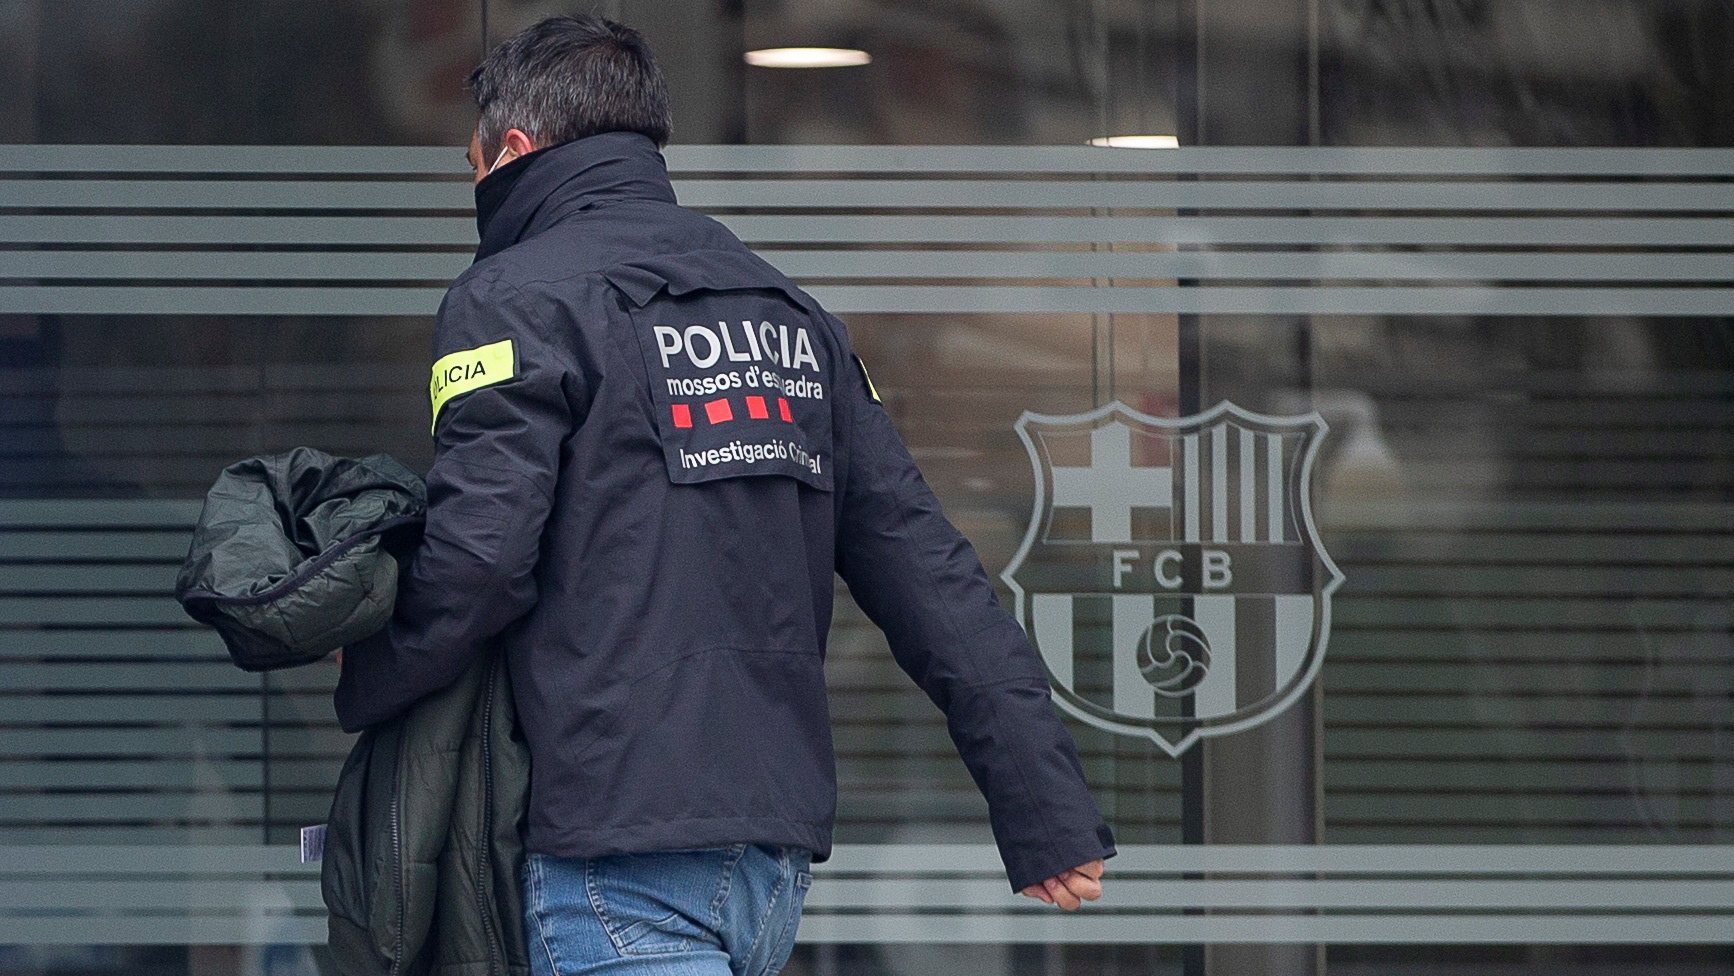 epa09045126 A members of Mossos d&#039;Esquadra regional police&#039;s Economic Offences Unit is seen at the Spanish soccer club FC Barcelona&#039;s headquarters during a raid amid the investigation of the so-called &#039;BarcaGate&#039; case, in Barcelona, Spain, 01 March 2021. Police investigates if a company, hired by the club, carried out a smear campaign against opposite players and groups to then club&#039;s board of directors. According to judicial sources FC Barcelona&#039;s former president Bartomeu, former director of the presidency area Jaume Masferrer and the current director general of the club, Ocar Grau has been arrested.  EPA/Quique Garcia